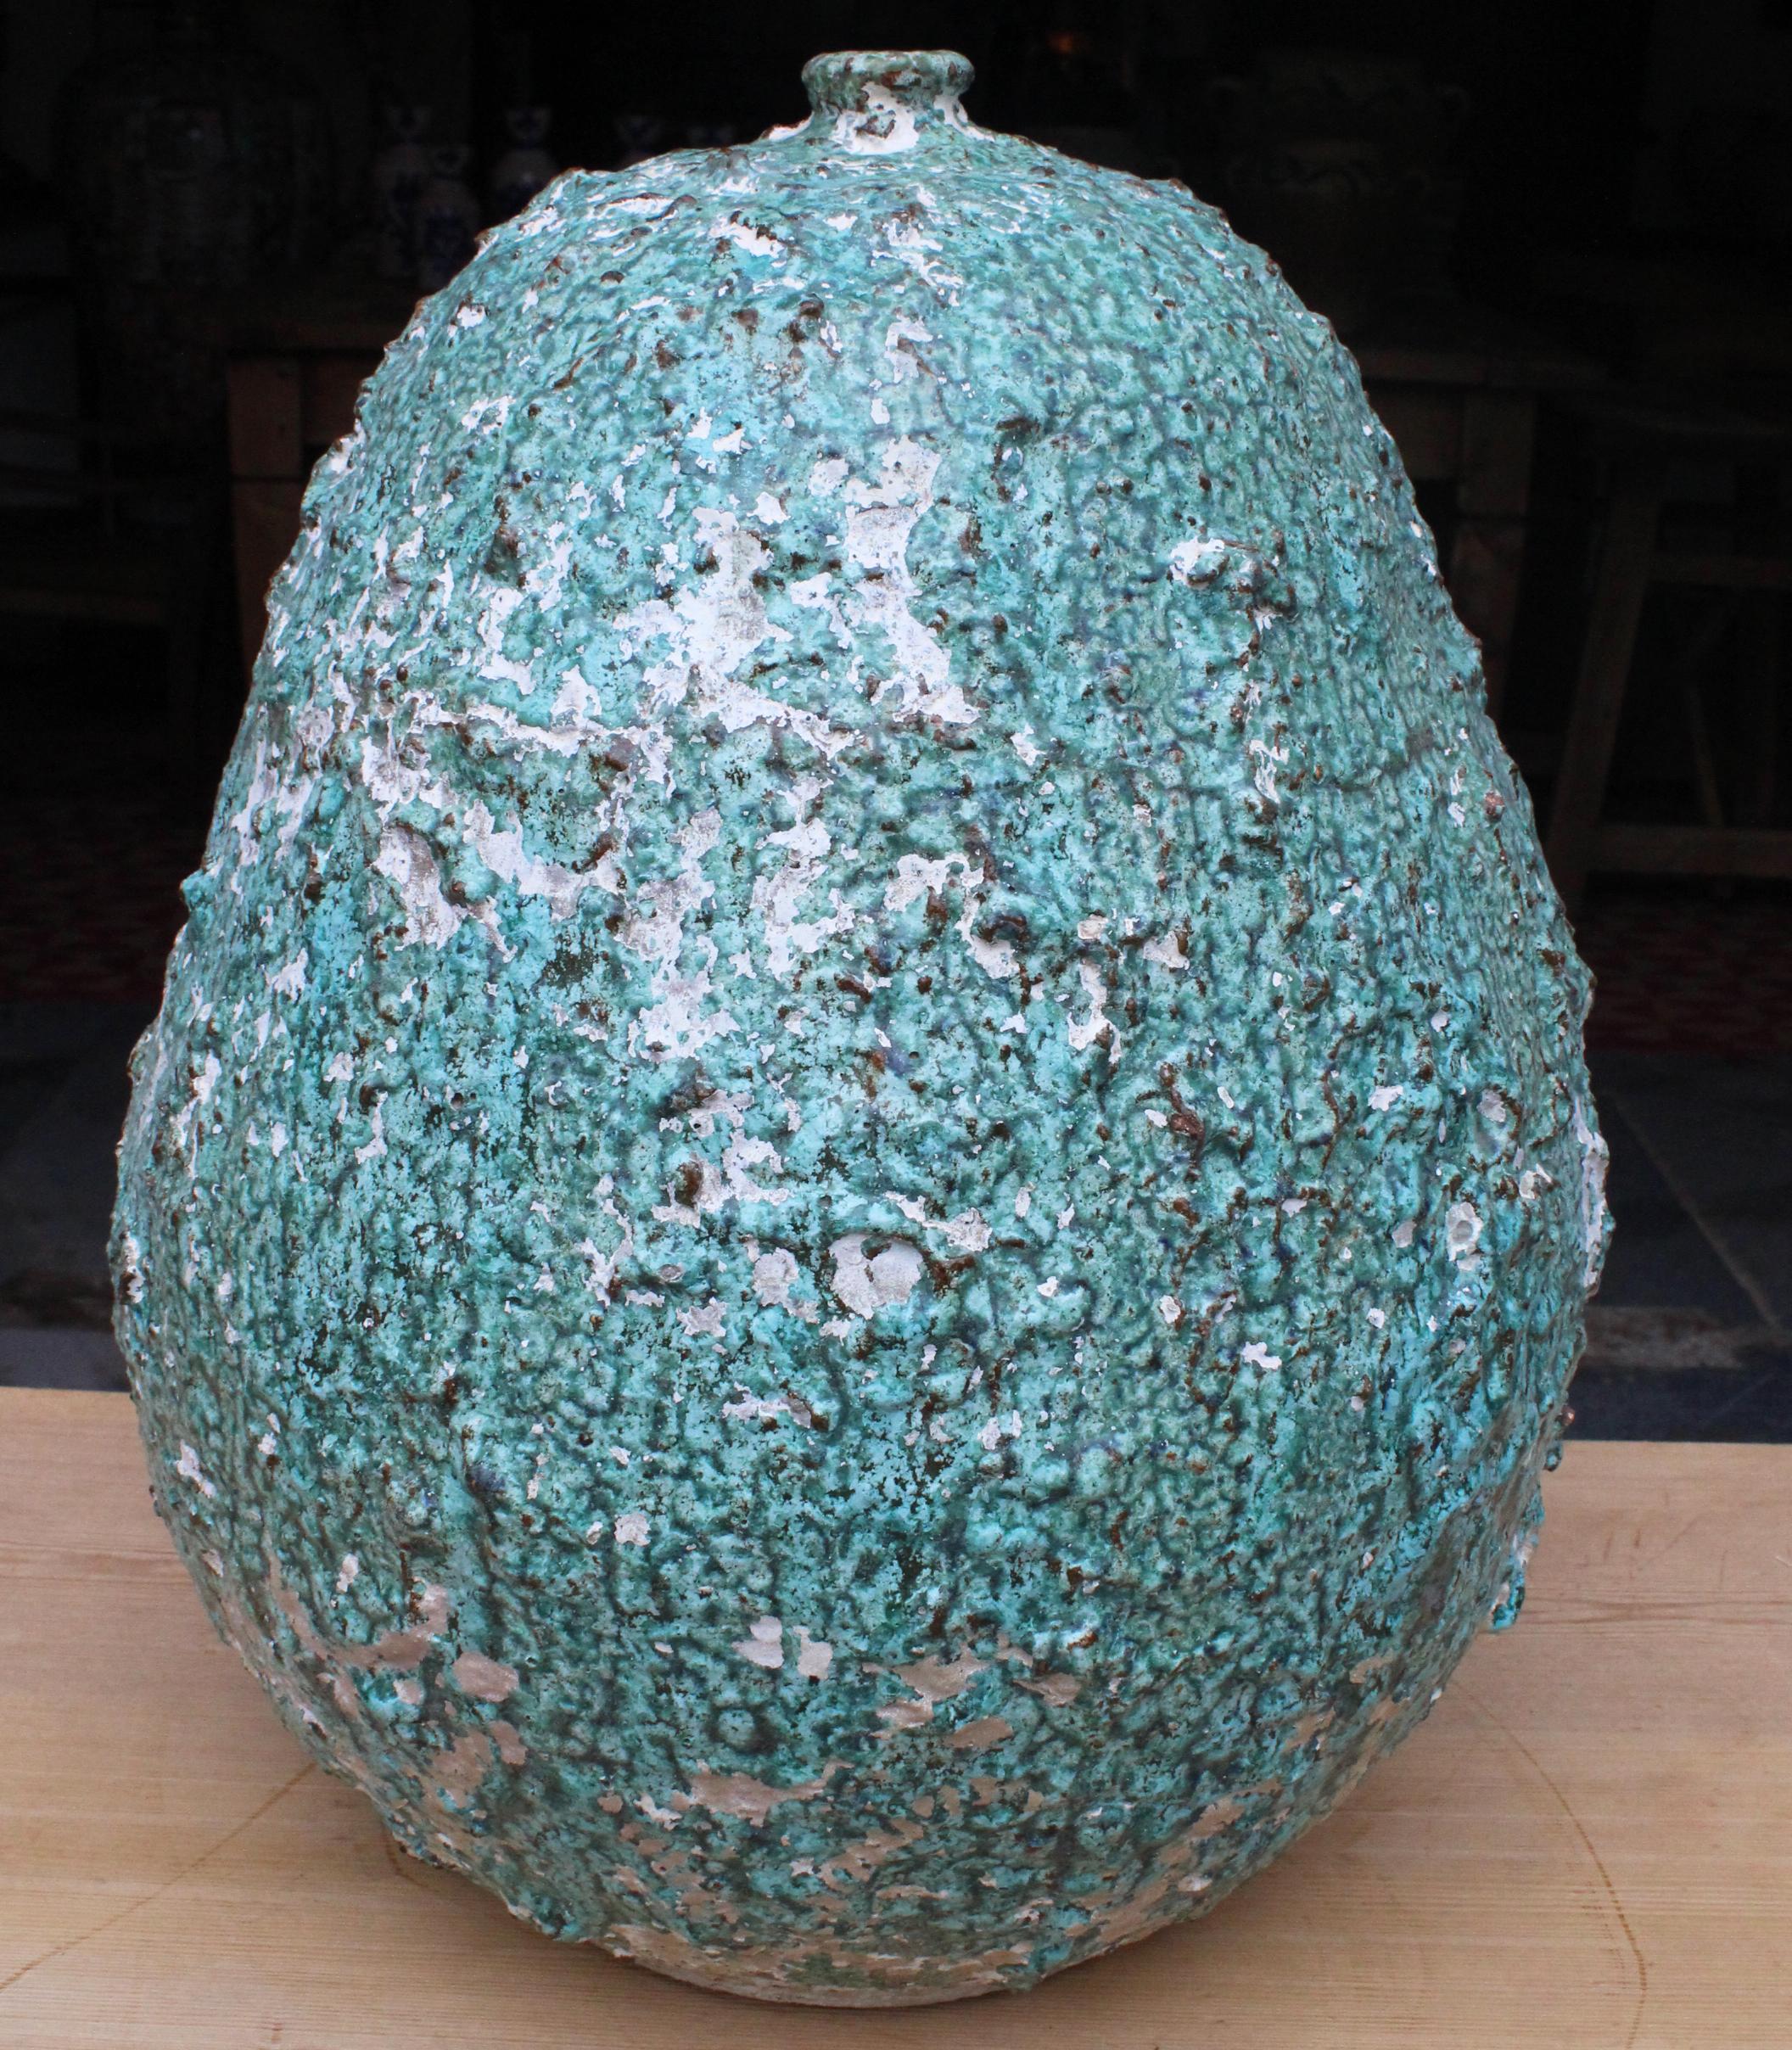 1970s modern ceramic art vase signed by Eimers F. It has a deep organic feel thanks to the rough finish and splashes of white over turquoise.

 